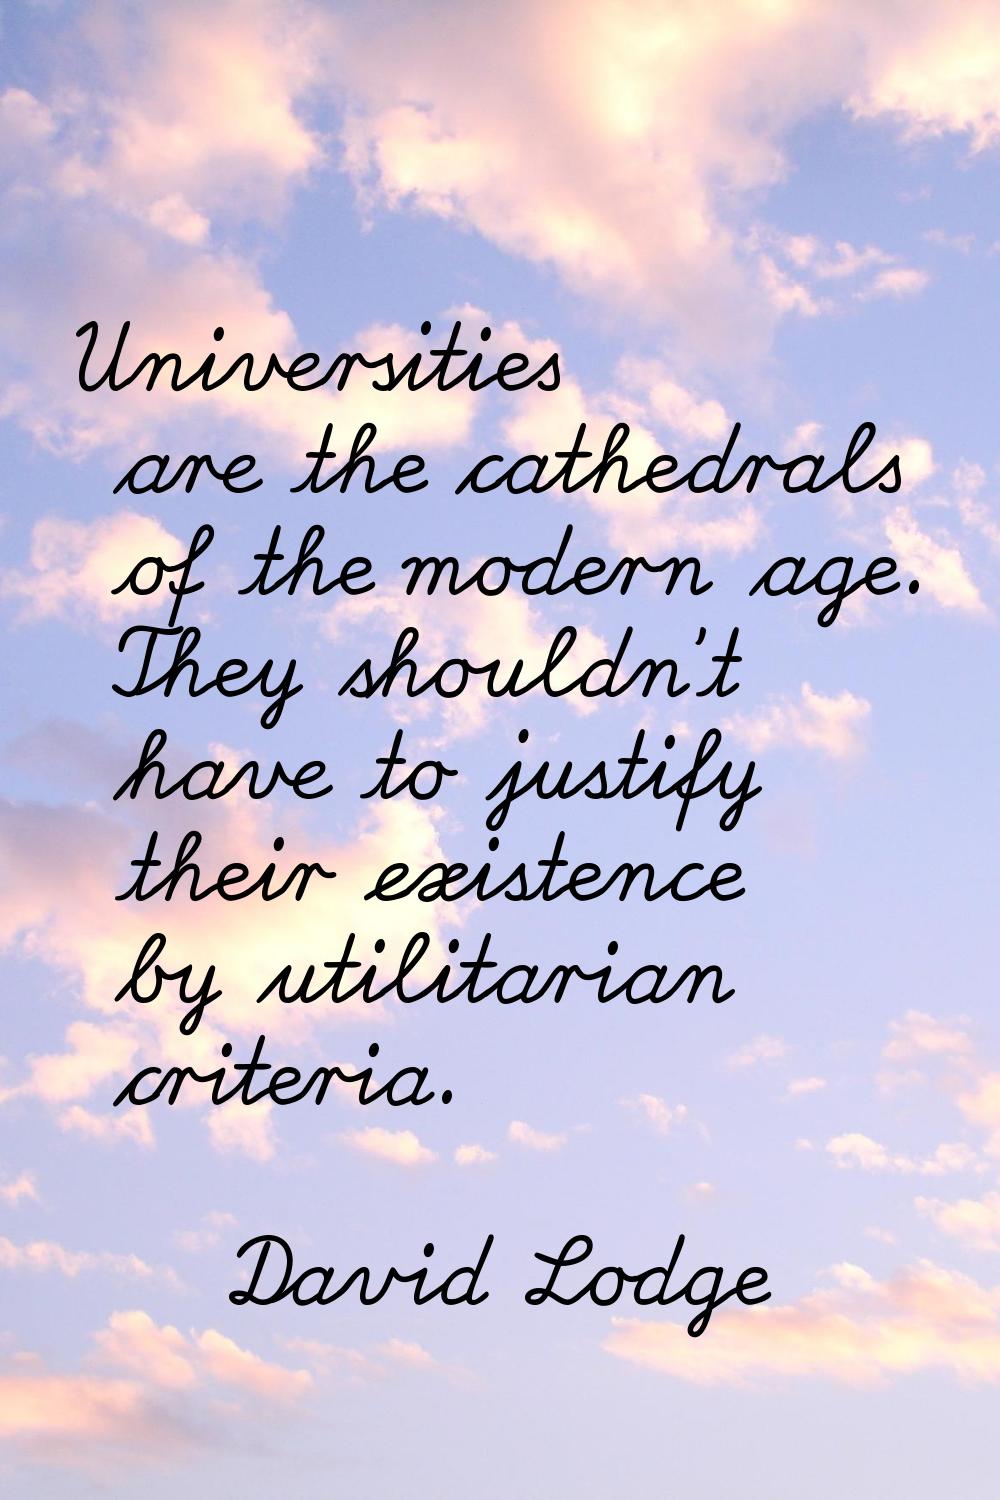 Universities are the cathedrals of the modern age. They shouldn't have to justify their existence b